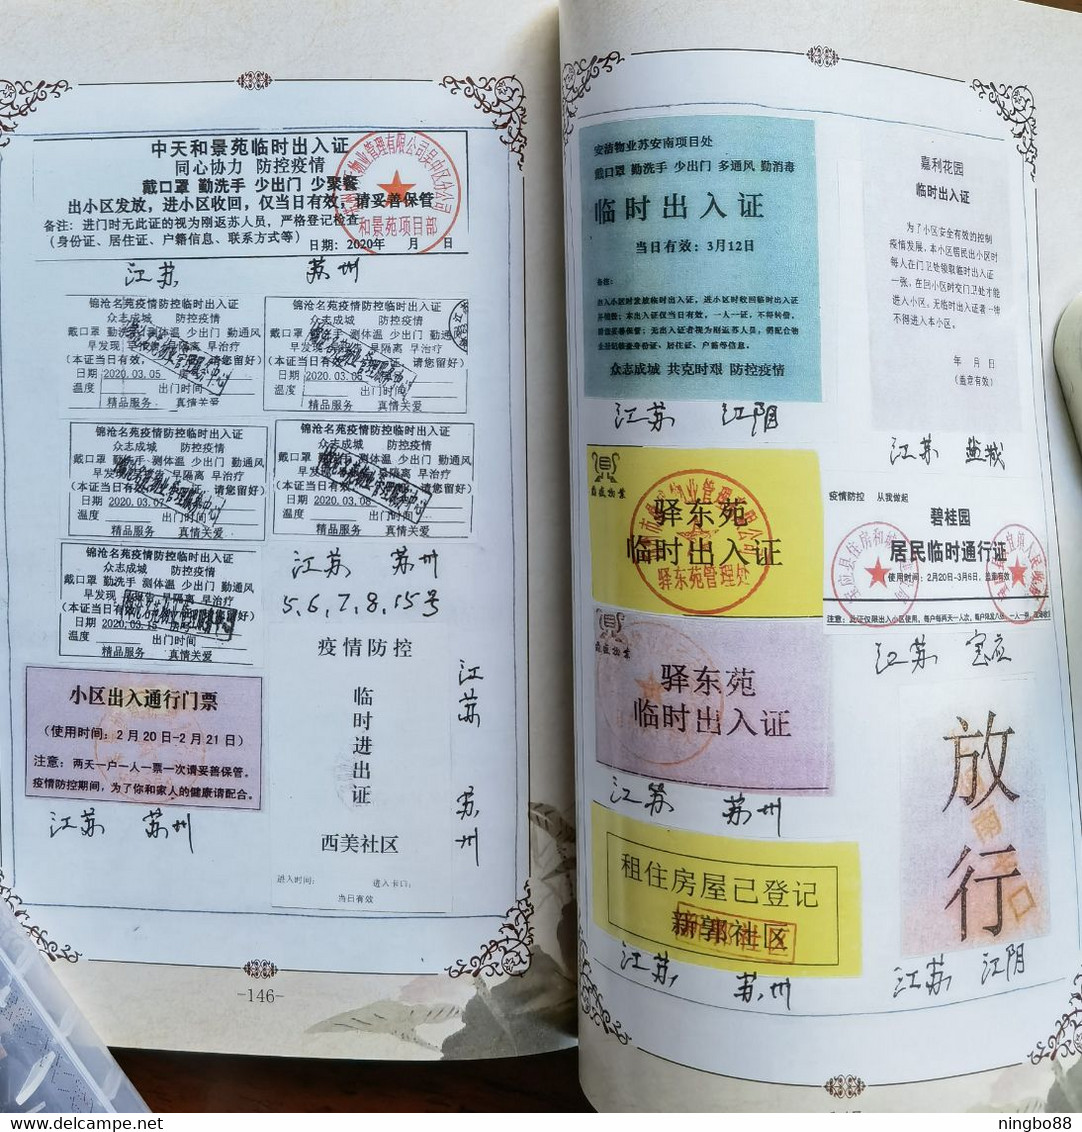 China 2020 Fighting COVID-19 Pandemic Postmarks & Covers Philatelic Collection Special Catalogue Book 164 Pages - Collectors